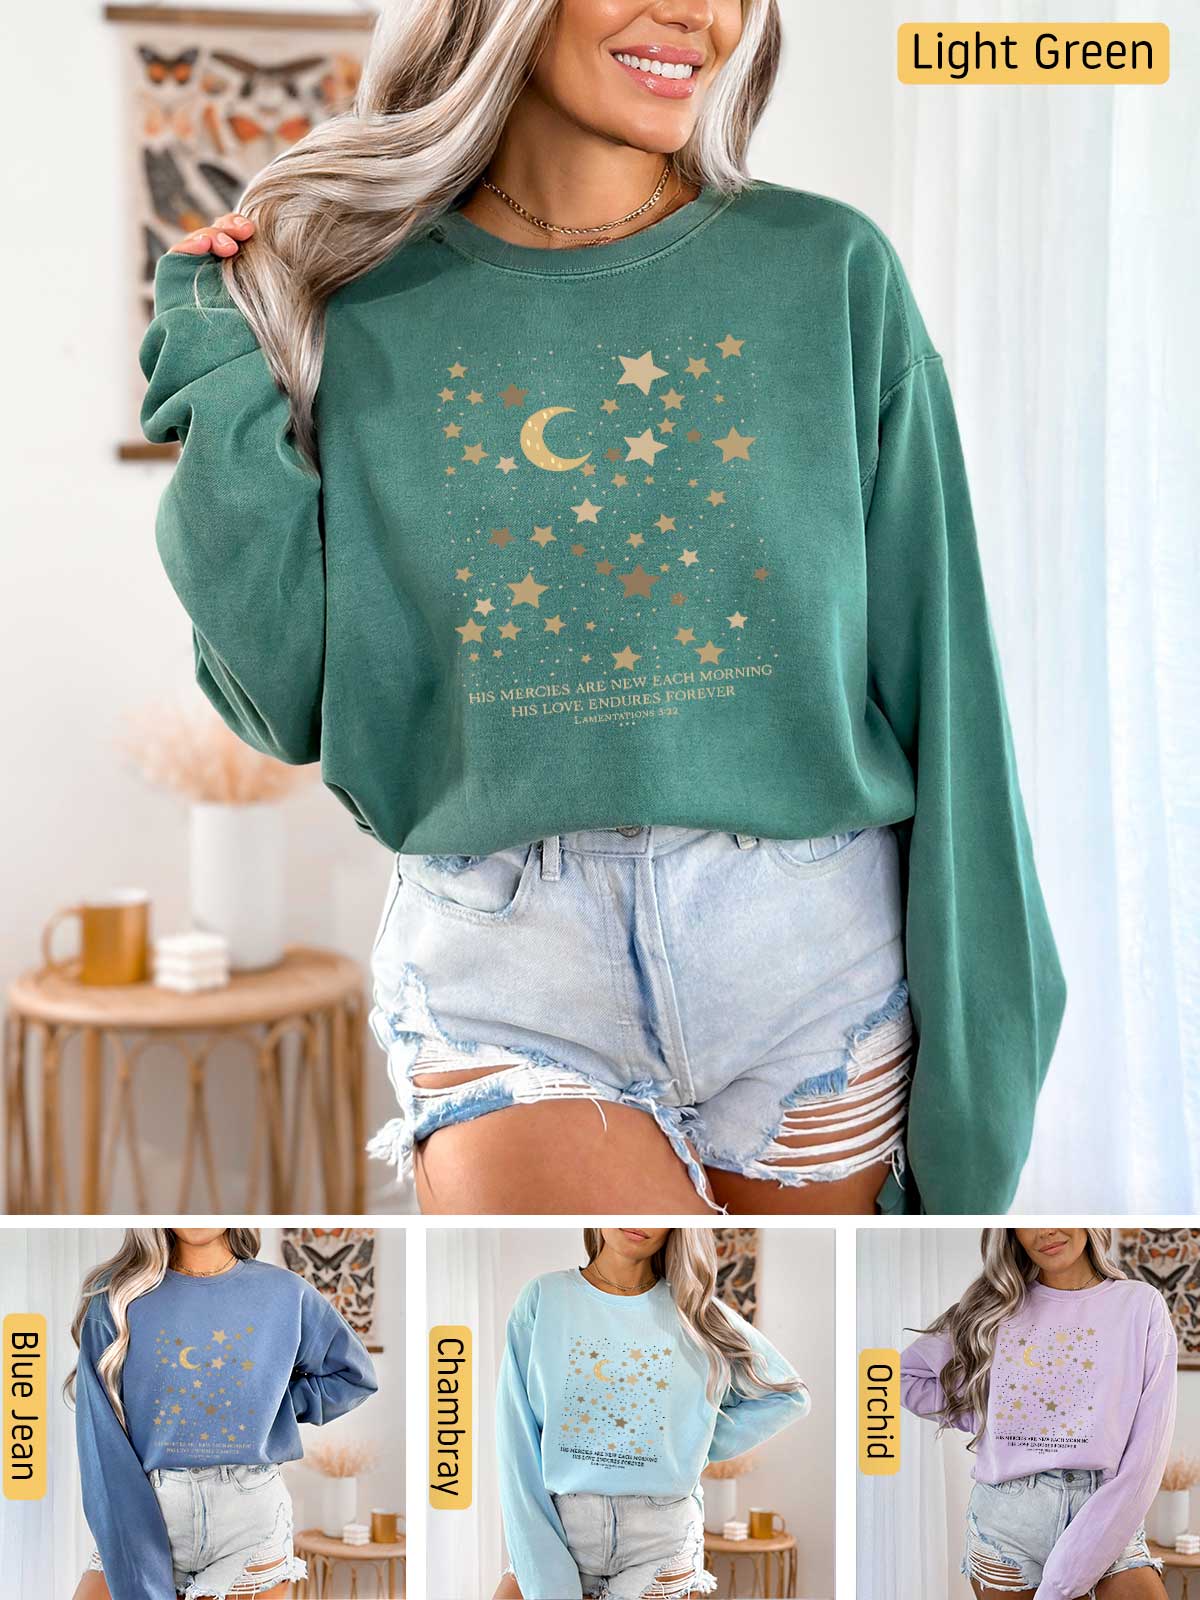 a woman wearing a green sweatshirt with stars and moon on it